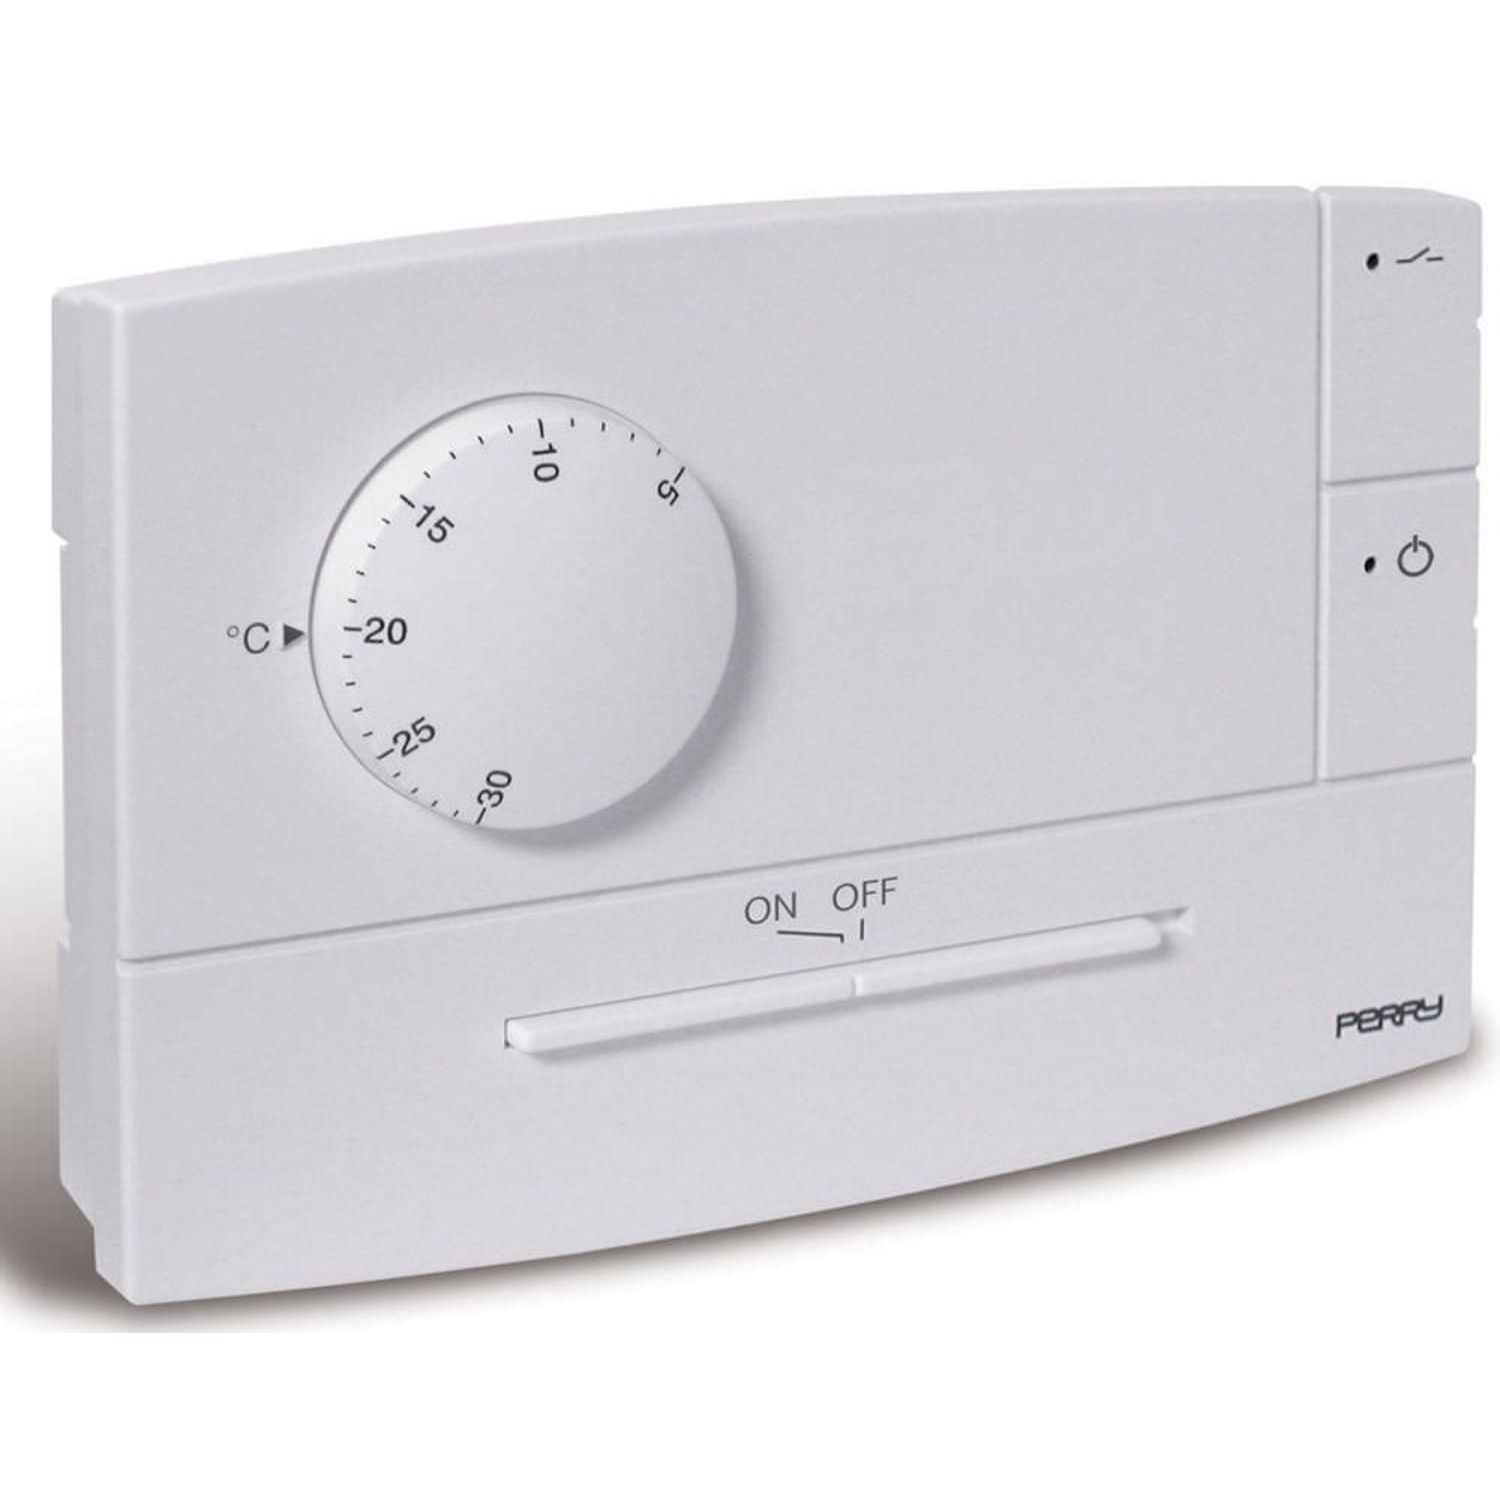 Perry white semirecessed thermostat